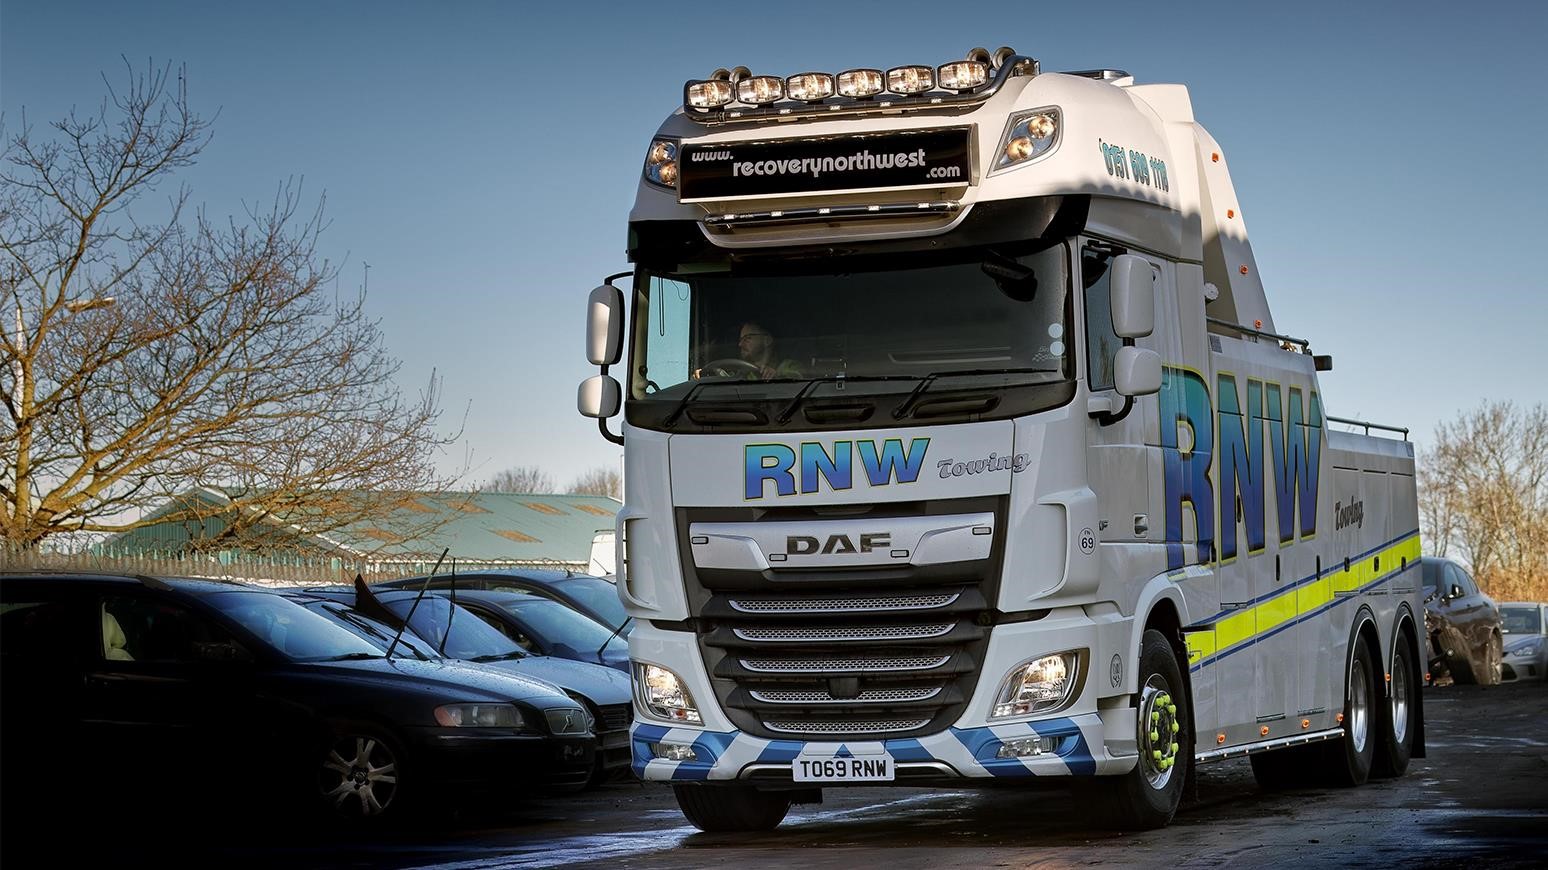 Wirral-Based Recovery North West Adds Six New DAF Trucks, Including Four XFs and Two LFs